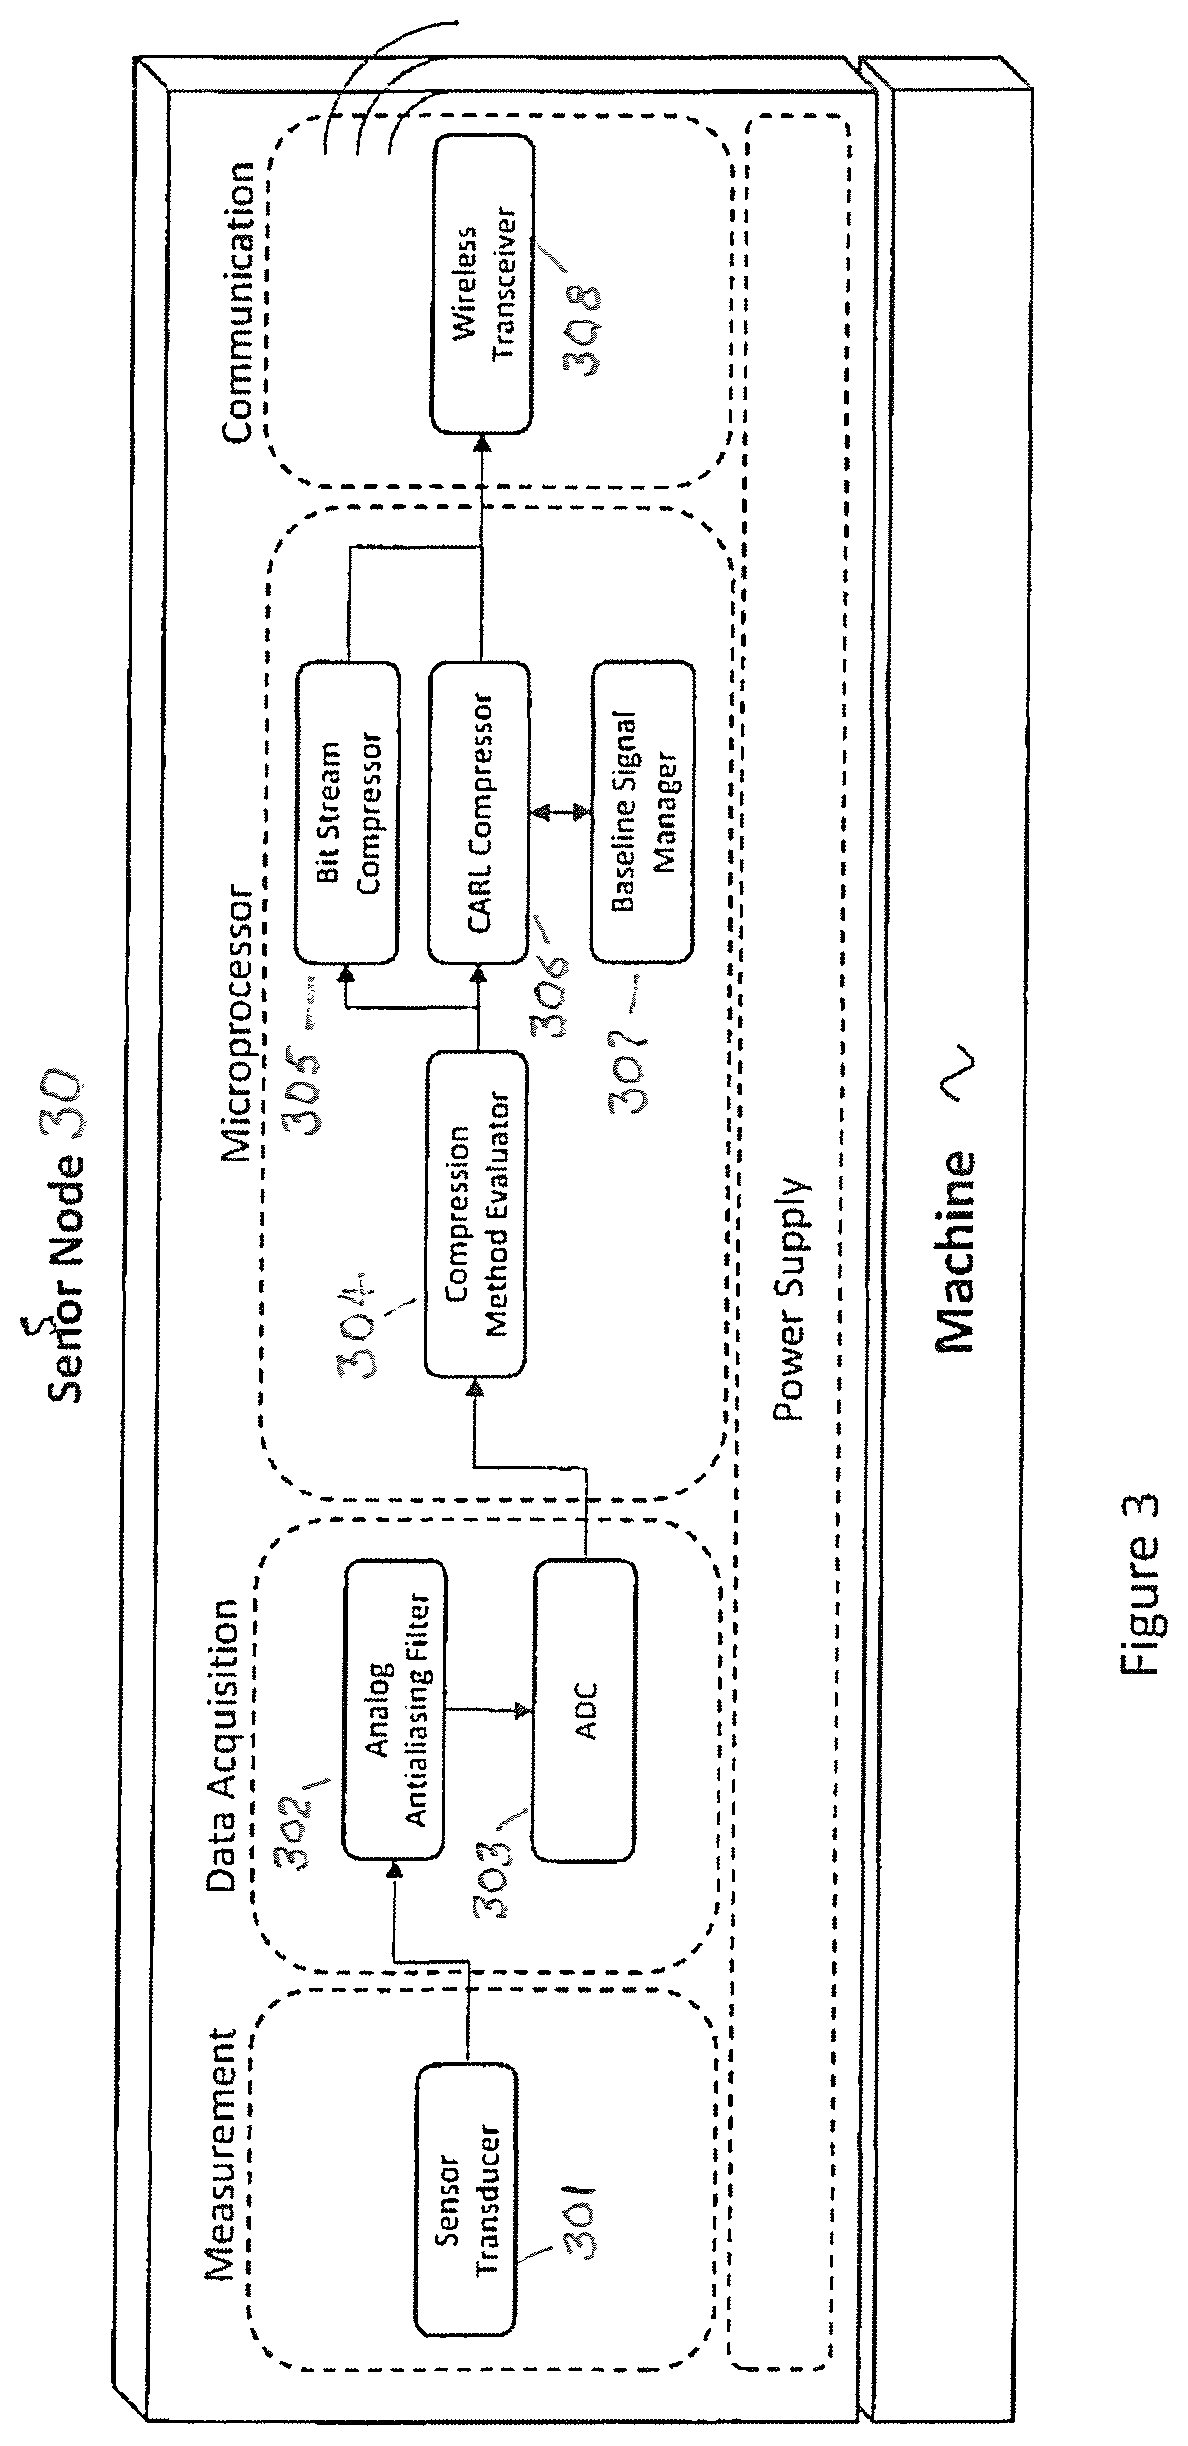 Compression method for resource constrained local area networks